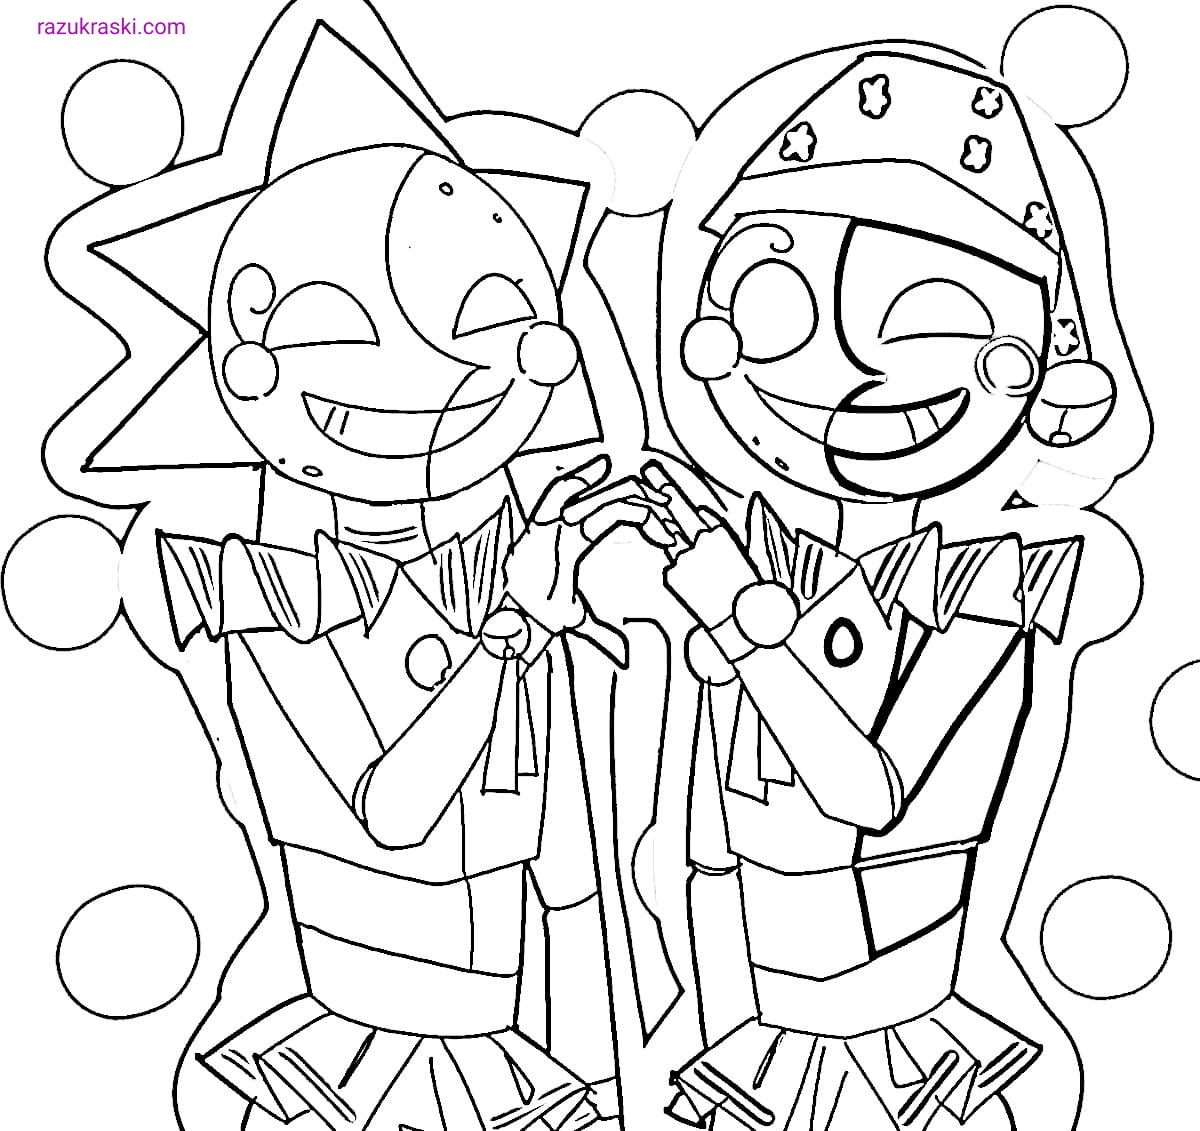 Coloring page FNAF 9 part of the game